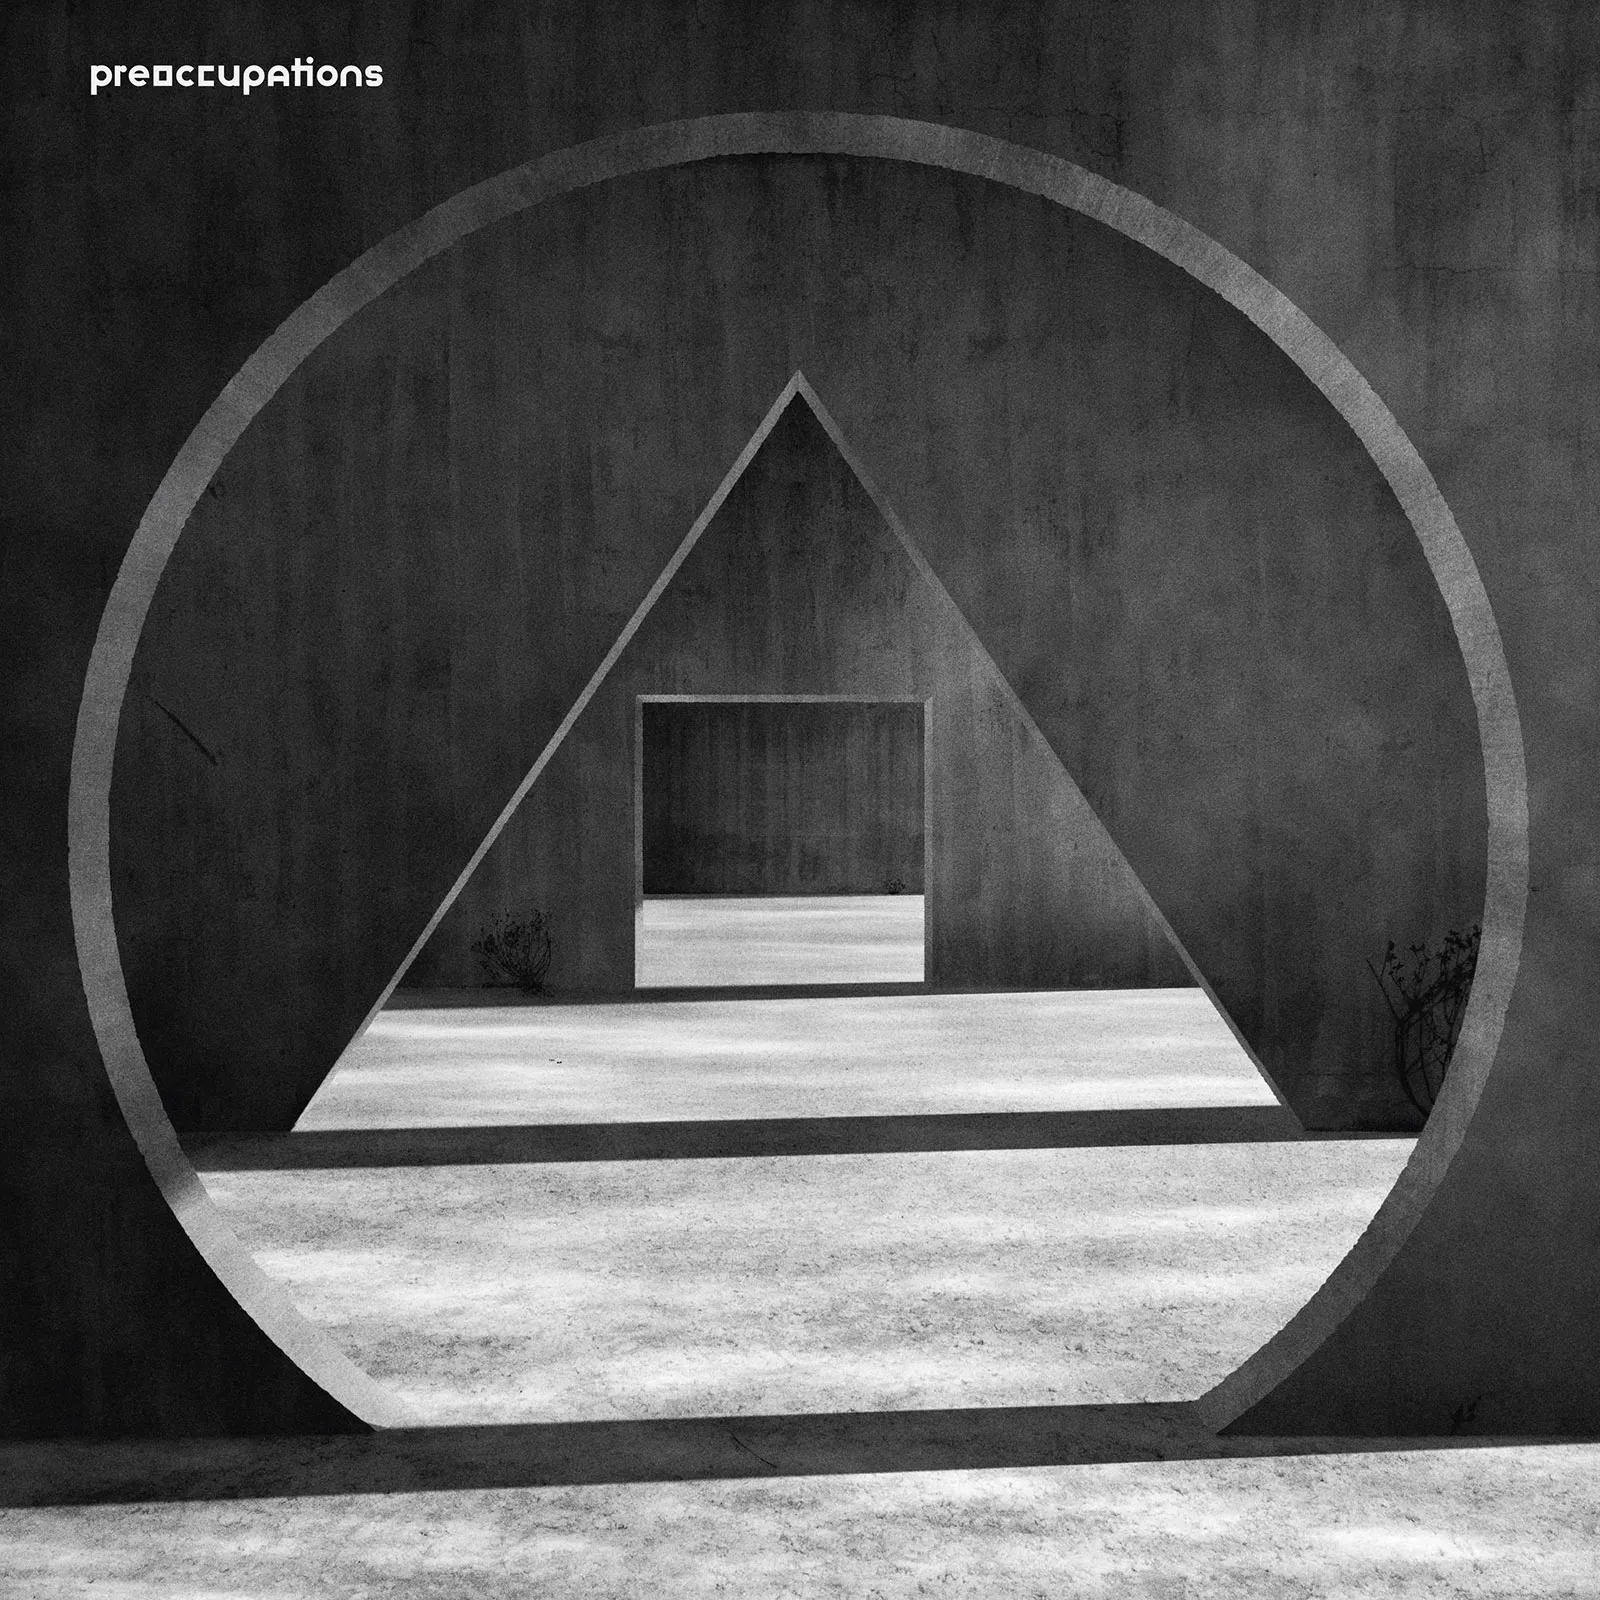 <strong>Preoccupations - New Material</strong> (Vinyl LP - black)